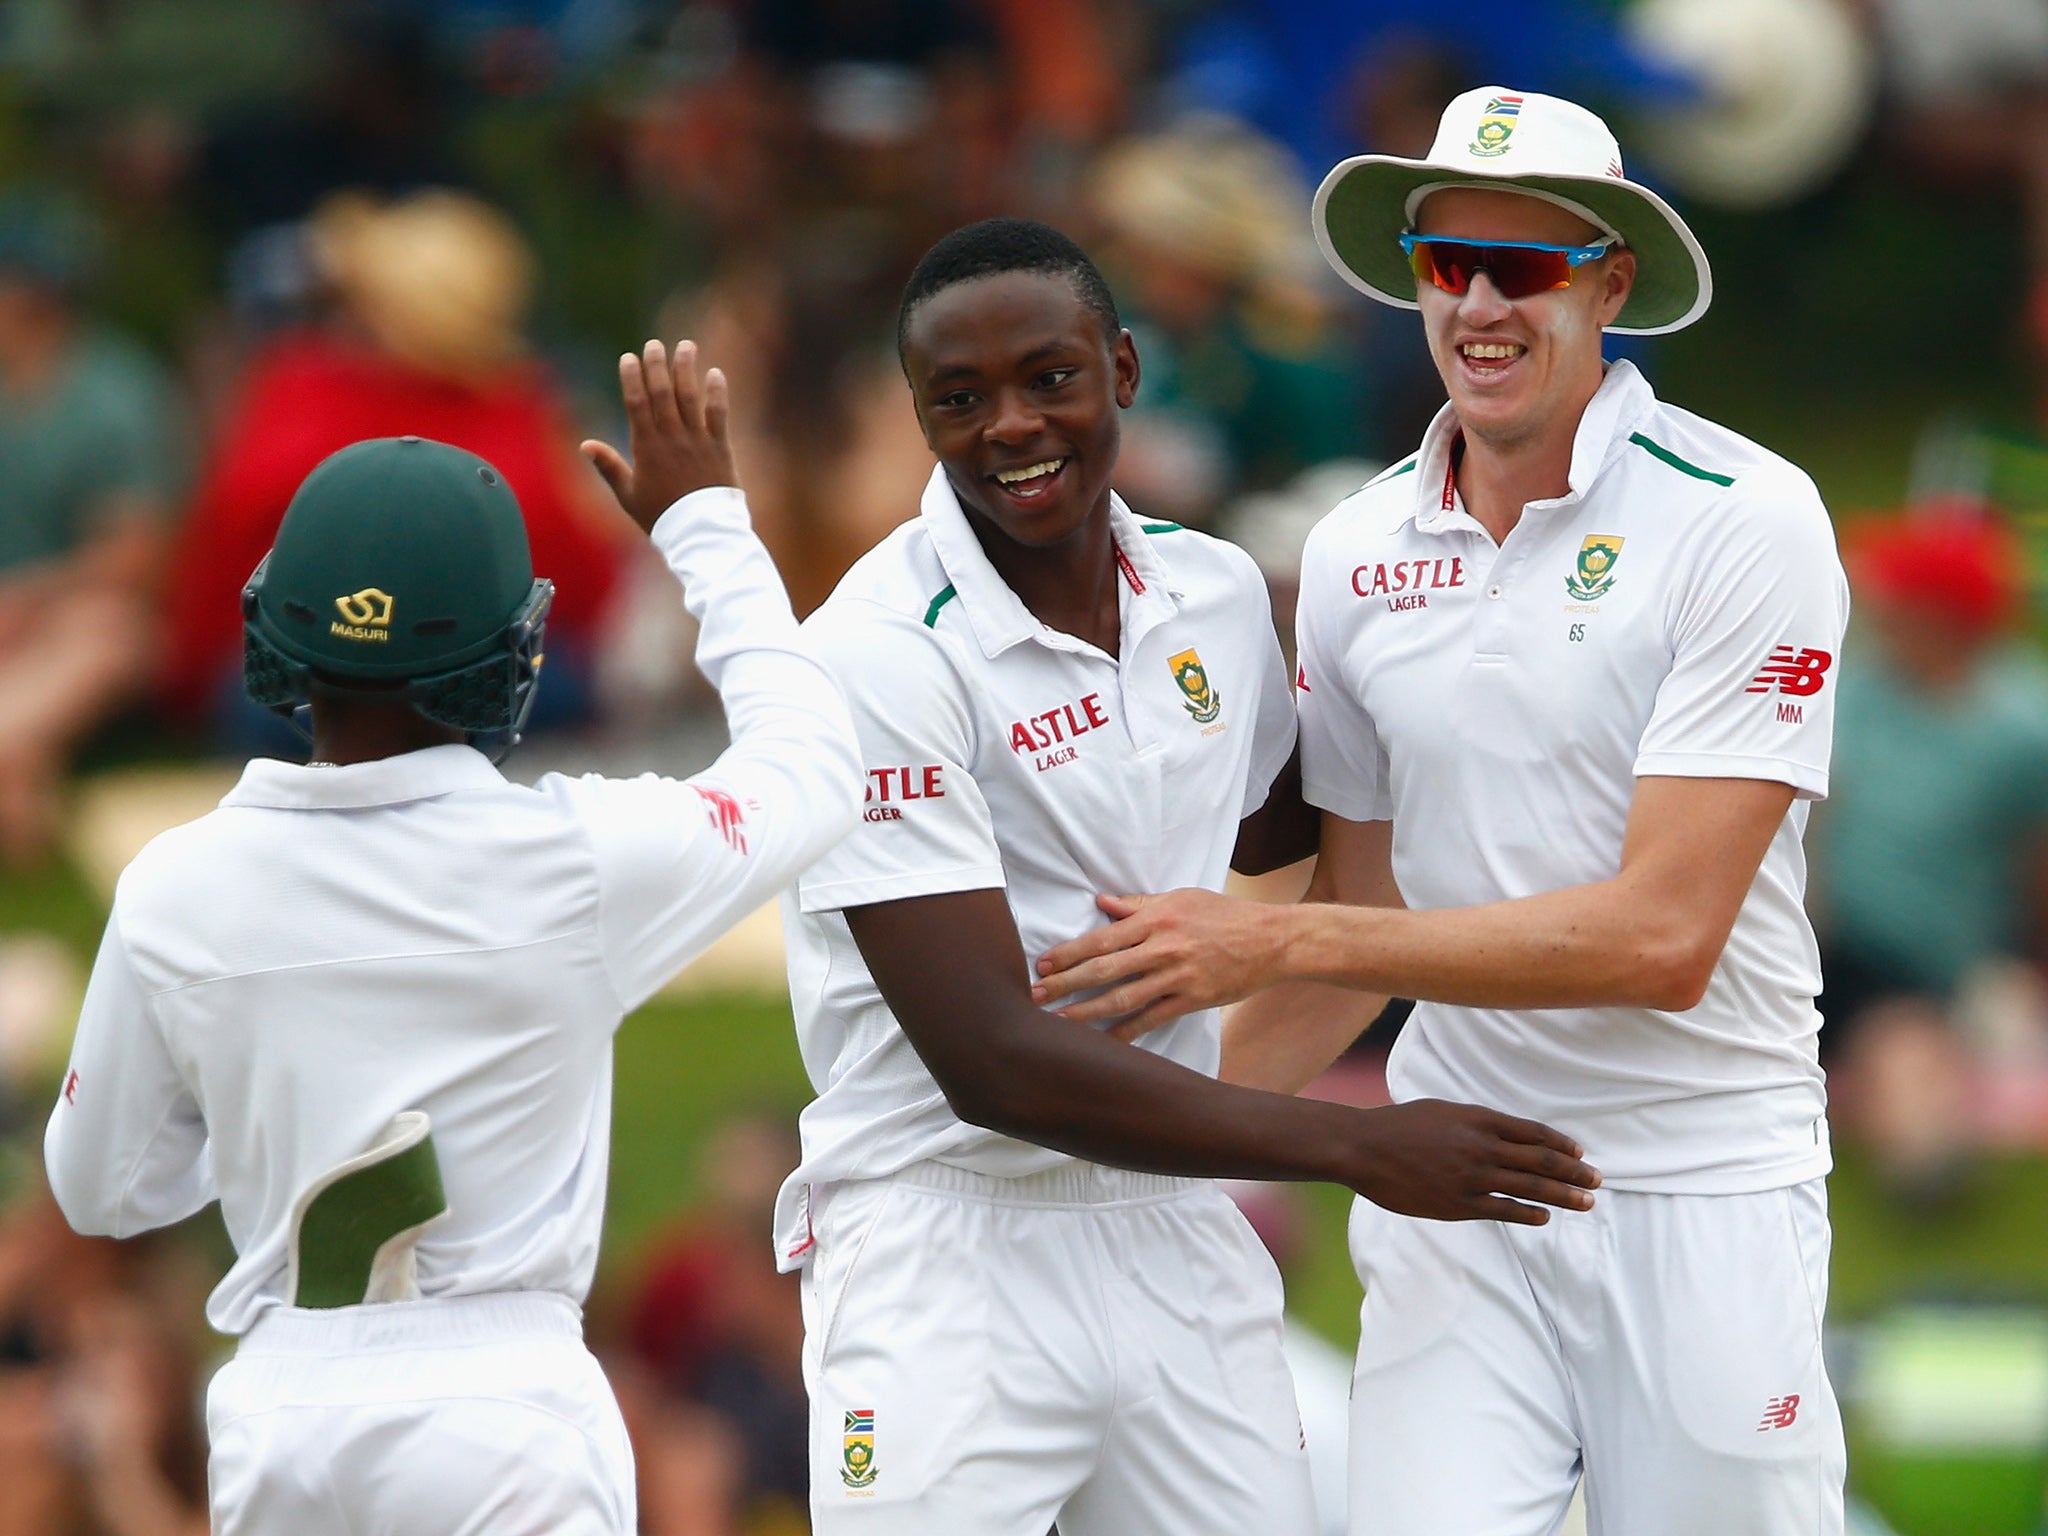 Kagiso Rabada is congratulated by Morne Morkel after he took the wicket of Jonny Bairstow